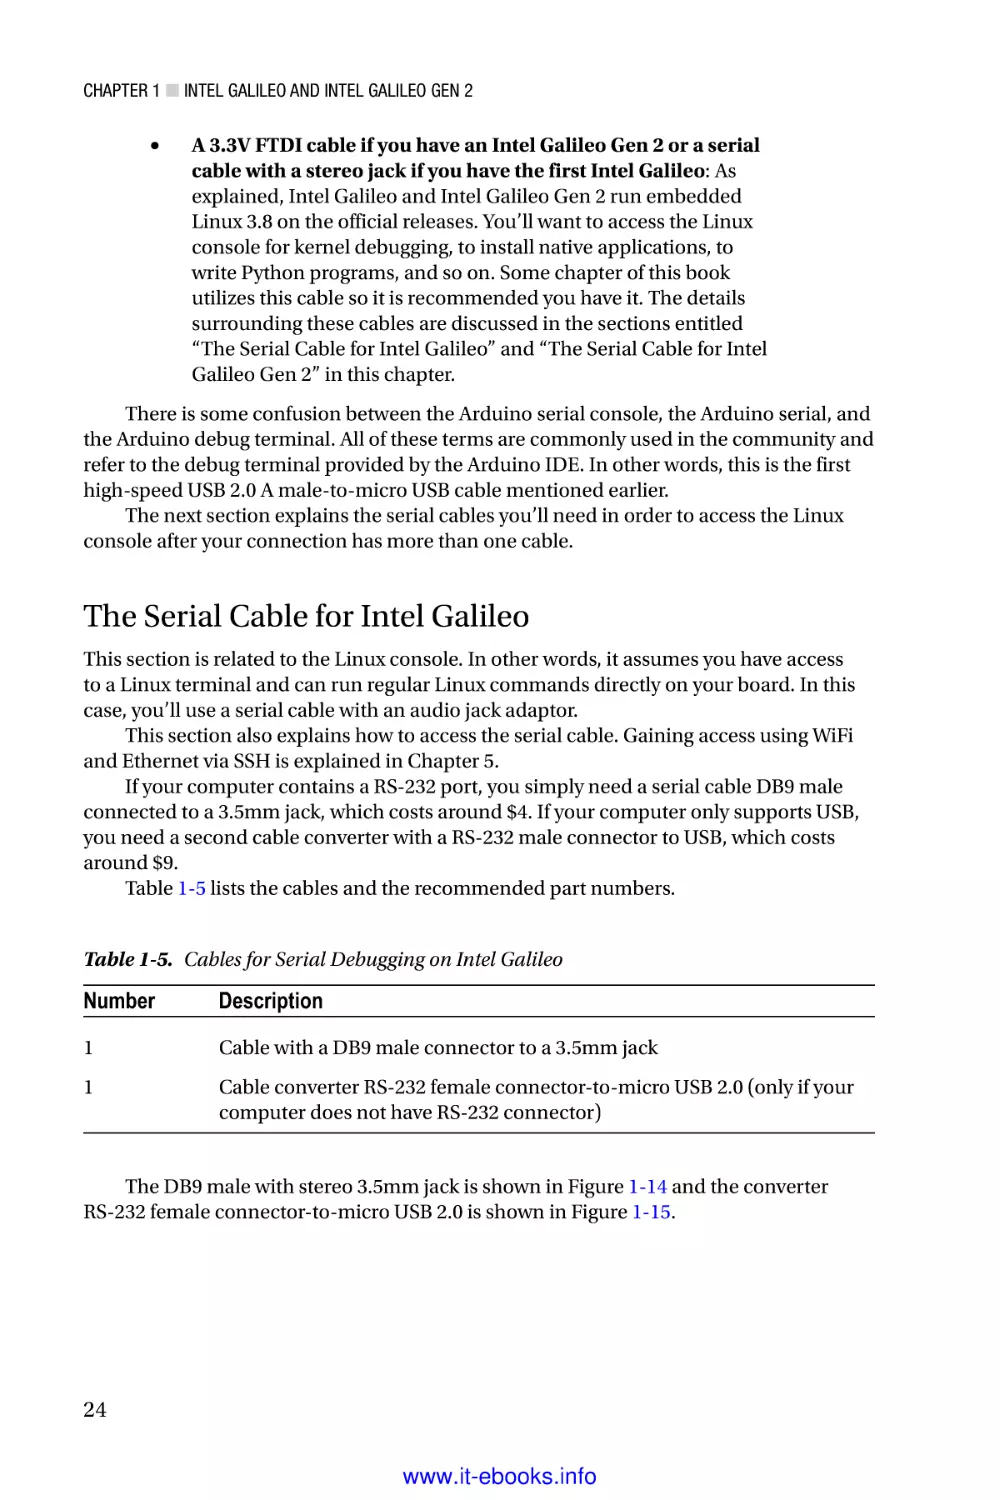 The Serial Cable for Intel Galileo